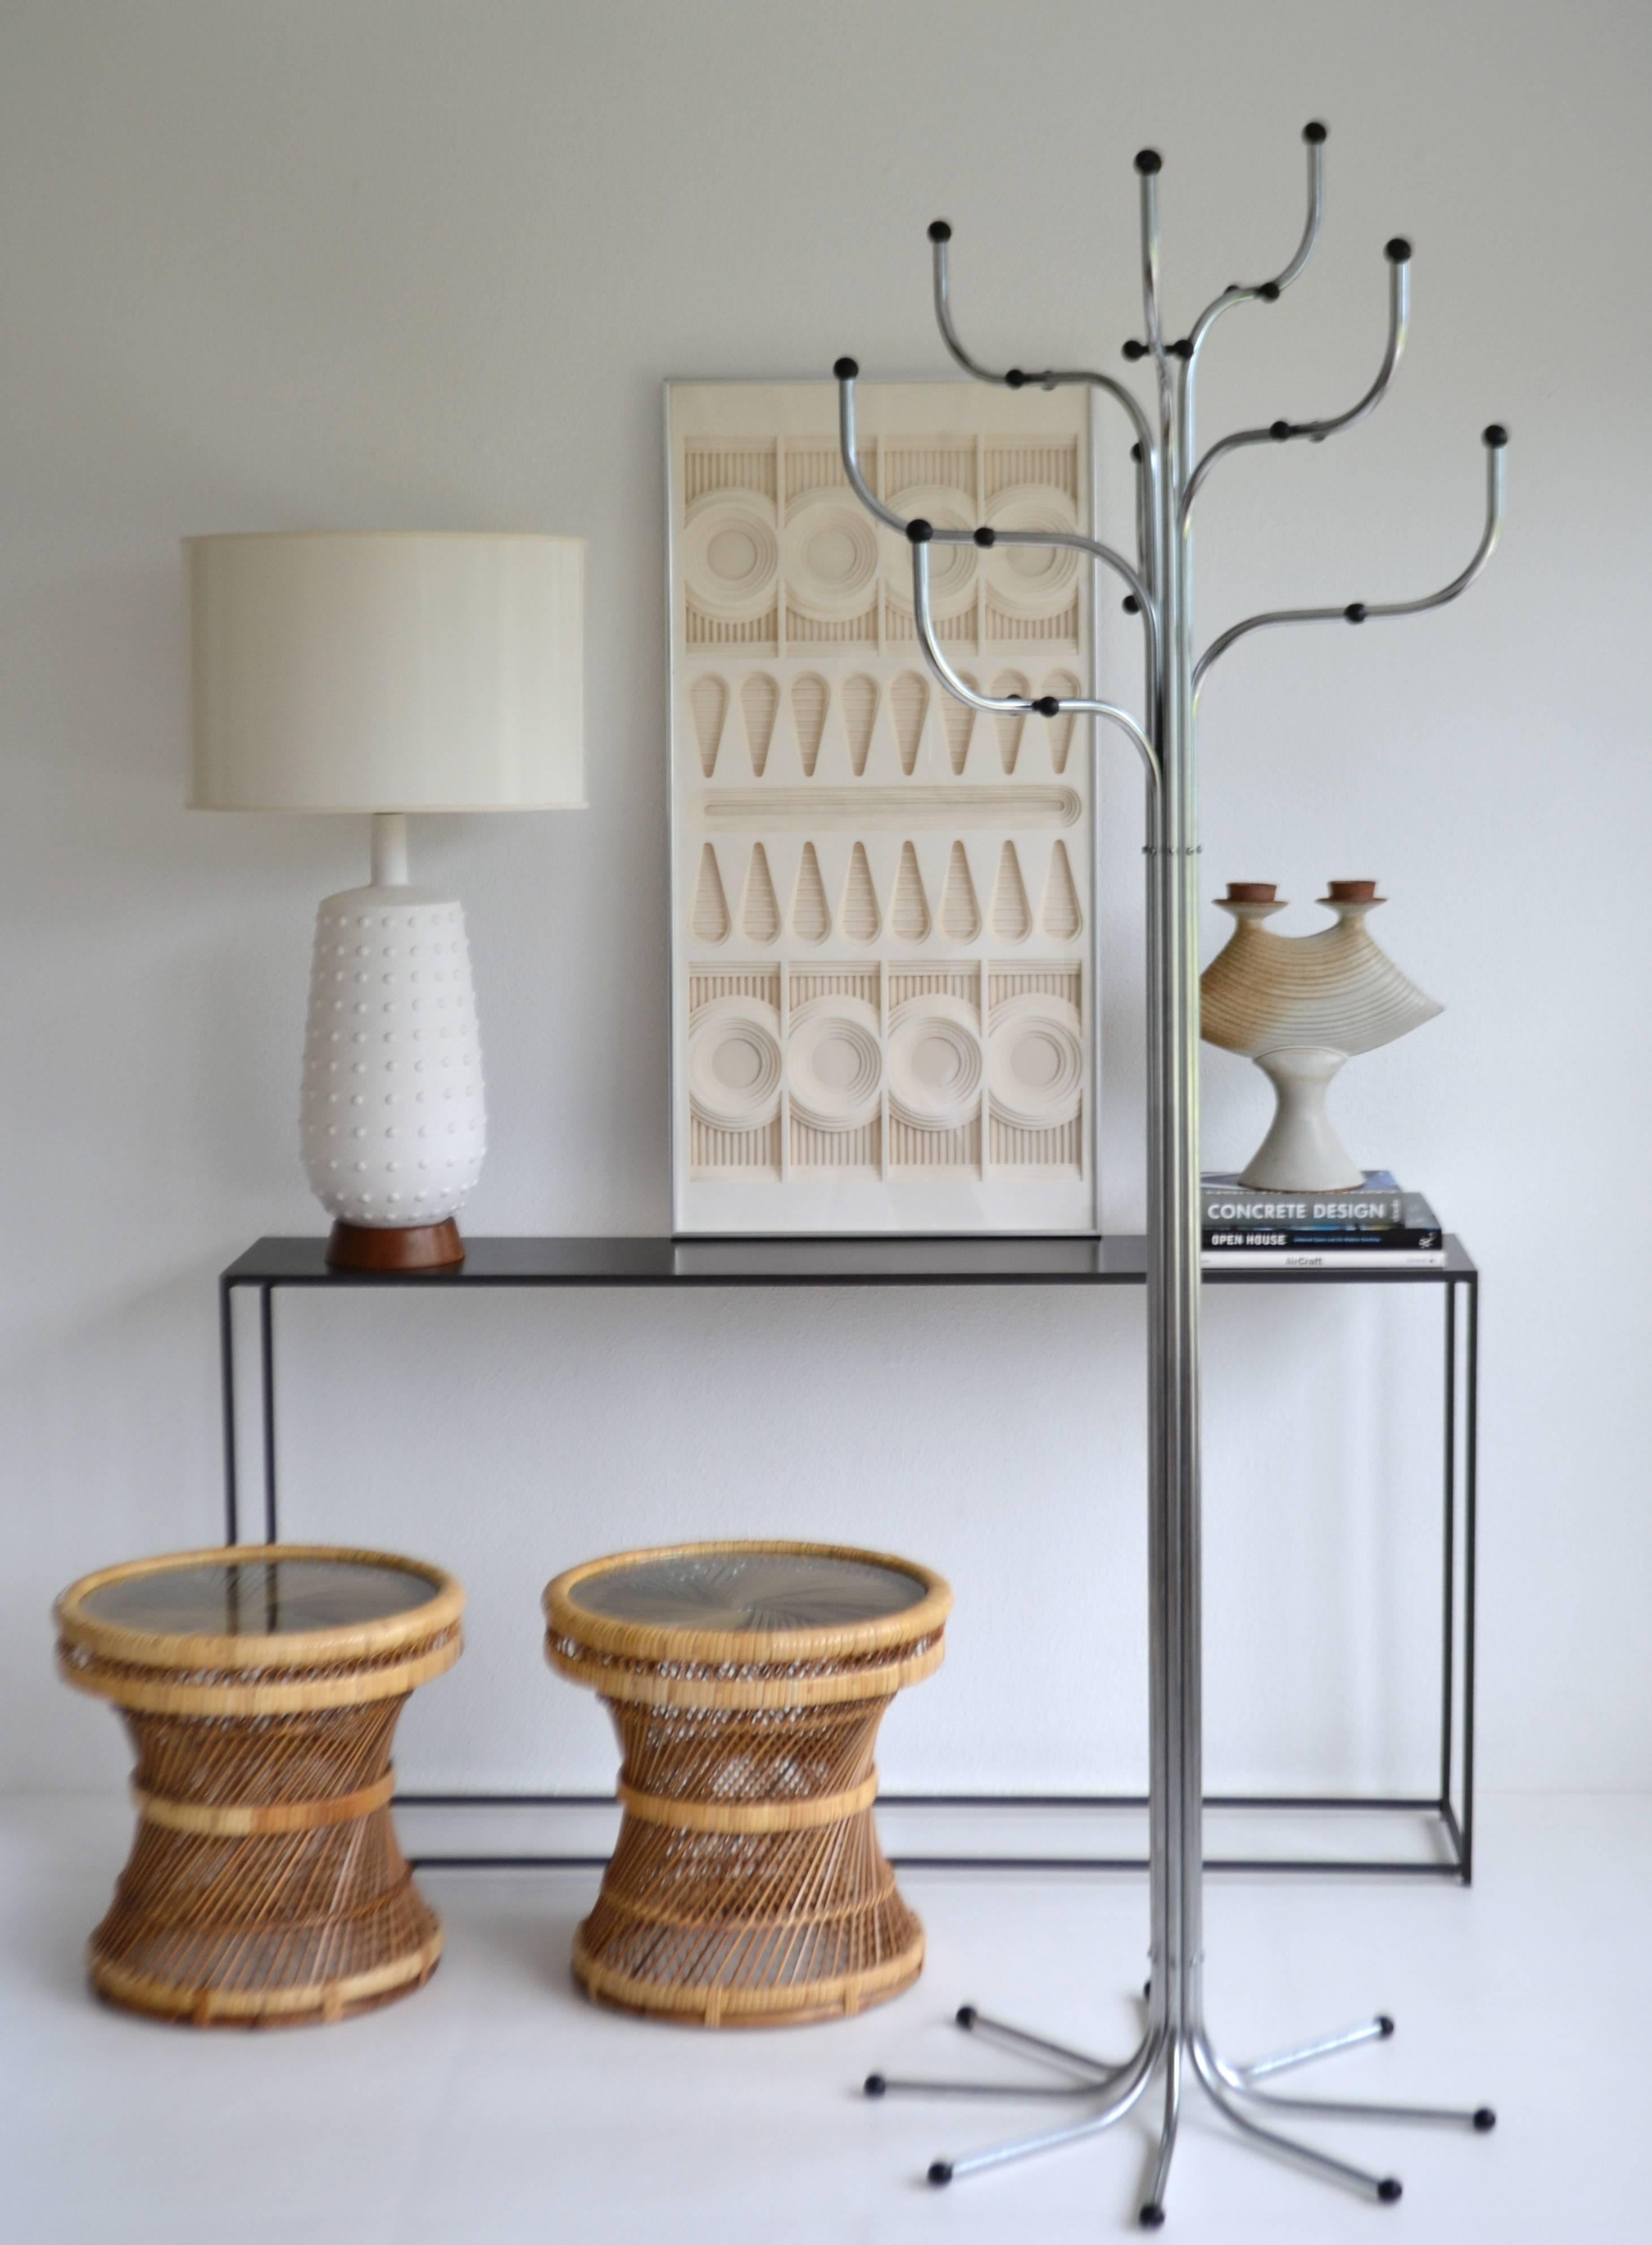 Striking Mid-Century sculptural standing coat rack by Sidse Werner, circa 1970s. This stunning large-scale tree form hat rack/ hall tree is designed of bent chromed steel tubes with round black ball knobs.